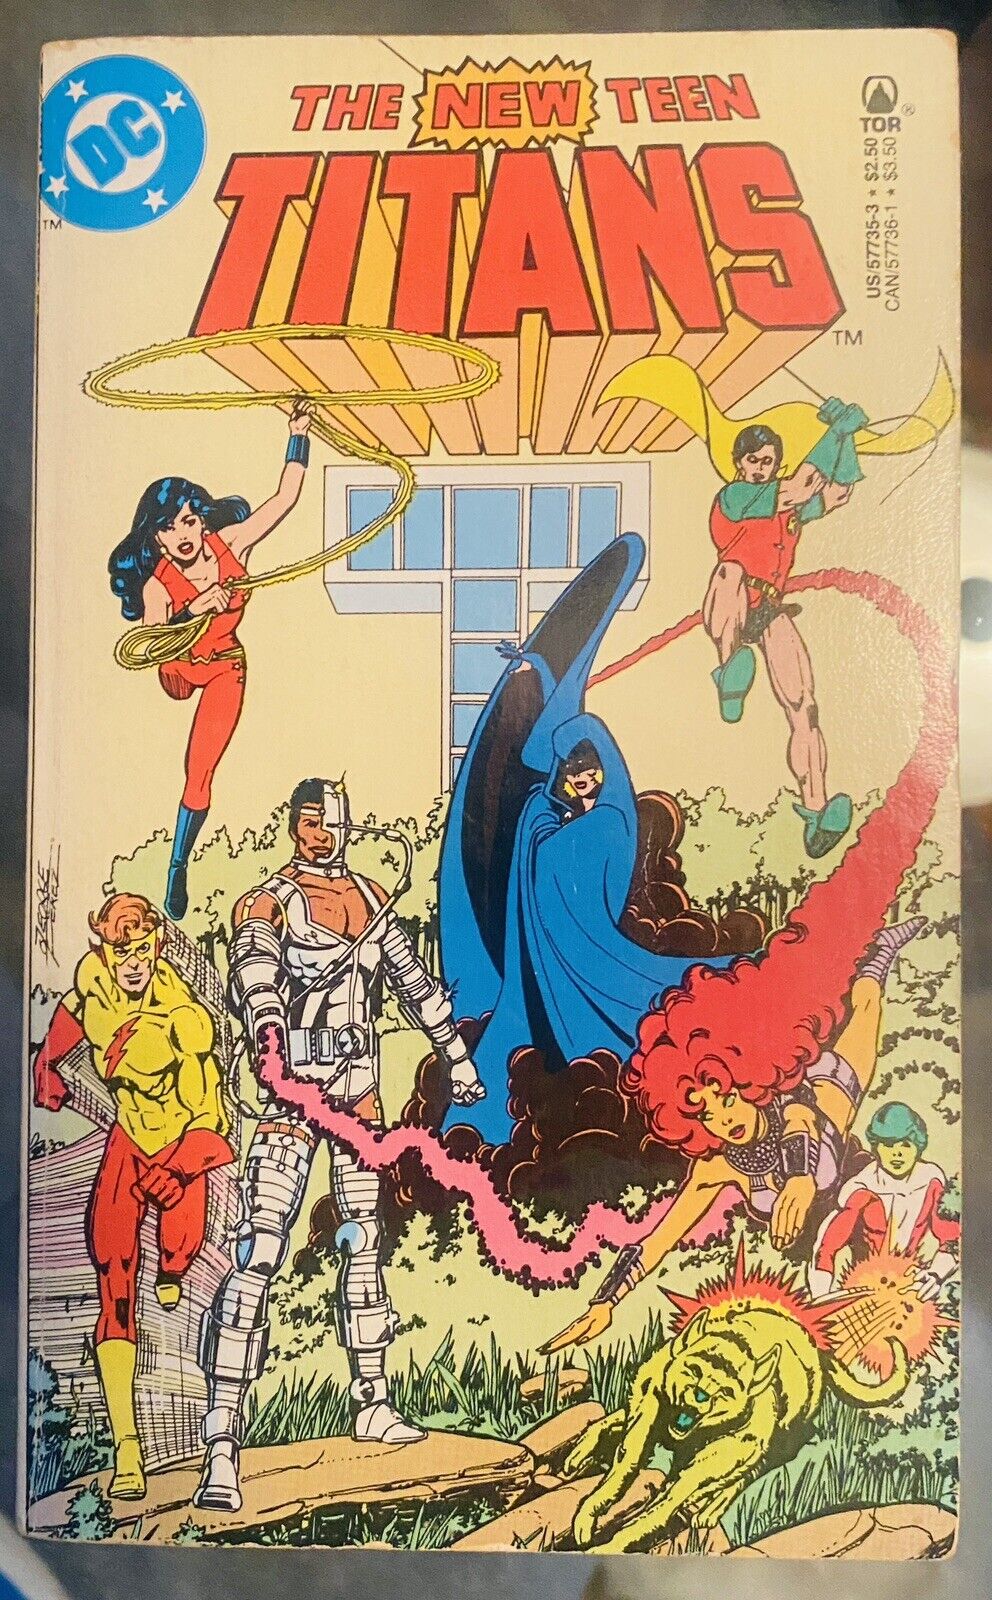 New Teen Titans TOR Paperback 1st edition (Oct. 1982) - 1 Owner Vintage PB Nice!